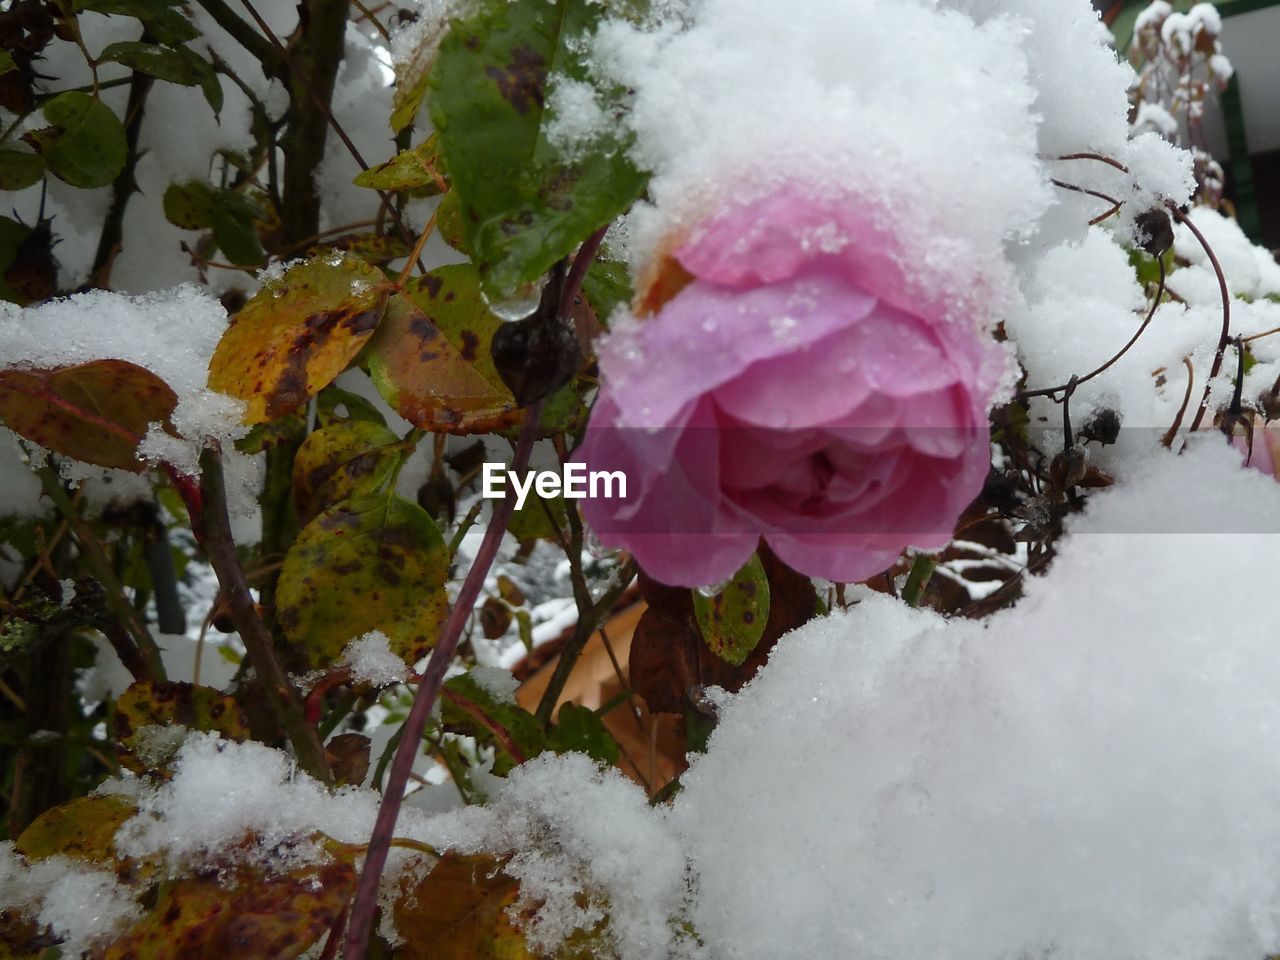 CLOSE-UP OF FROZEN ROSE ON SNOW